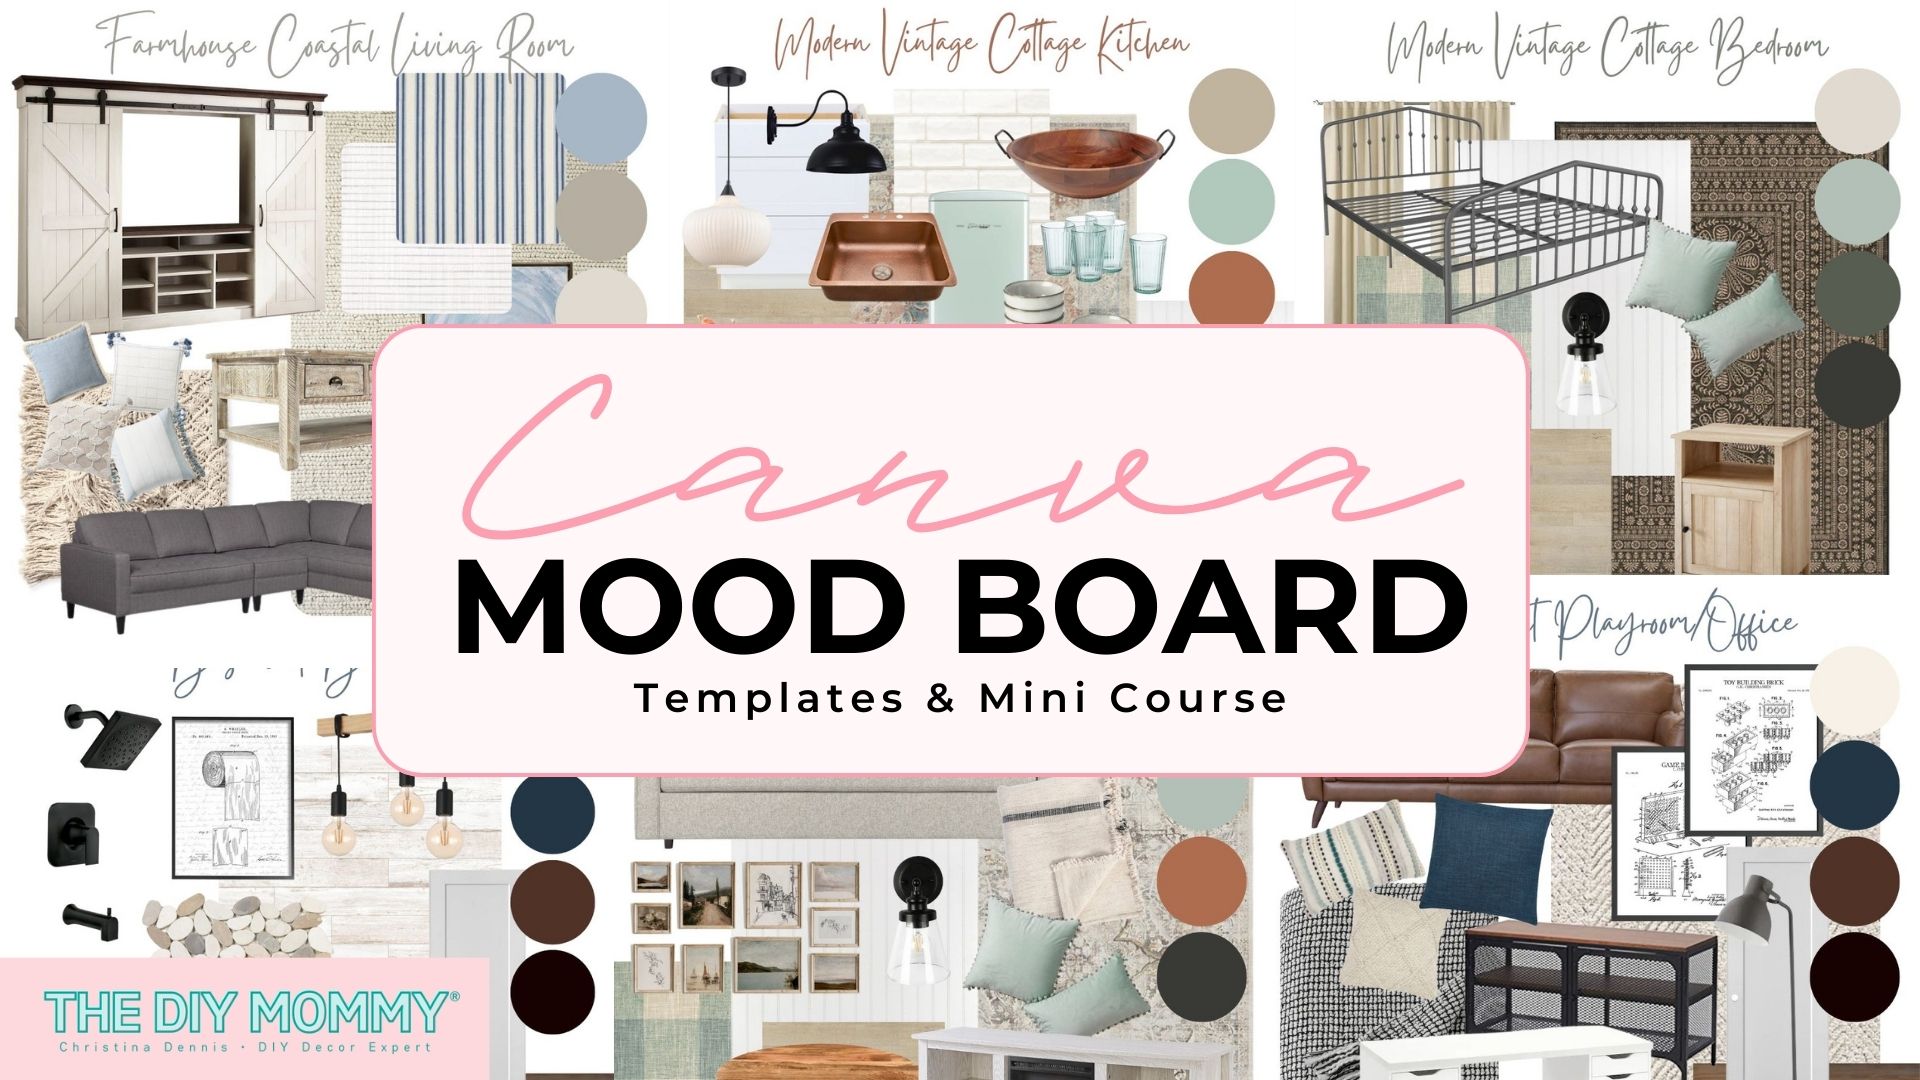 introducing-my-new-canva-mood-board-templates-mini-course-s-a-ch-a